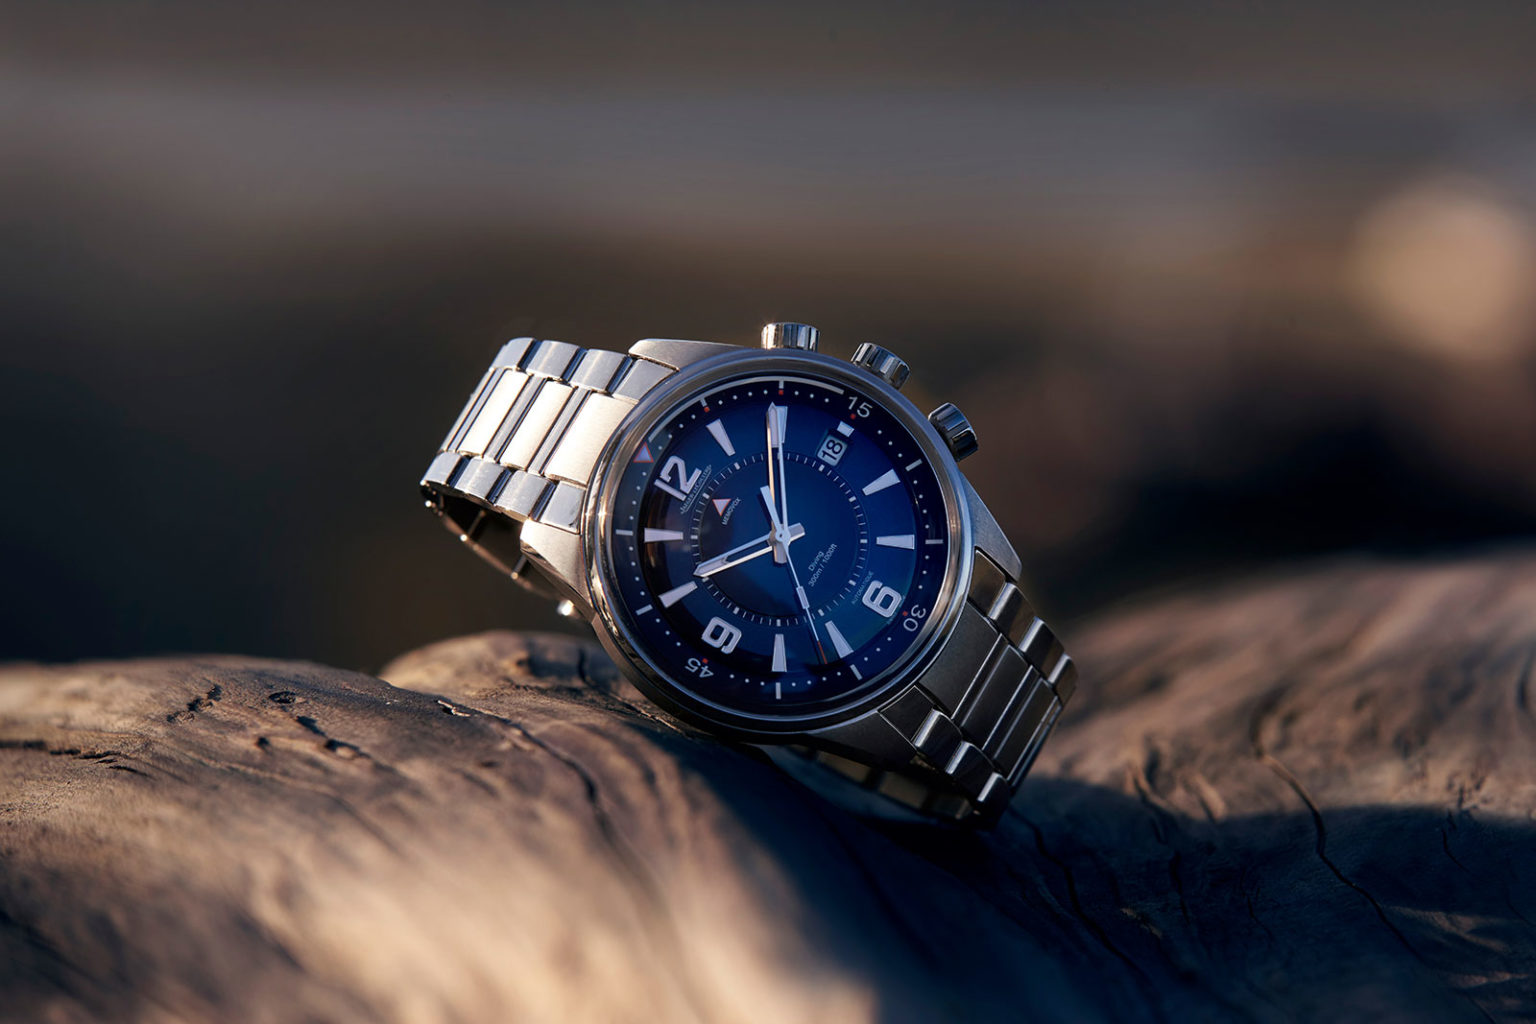 JaegerLeCoultre Introduces the Polaris Mariner Memovox and Mariner